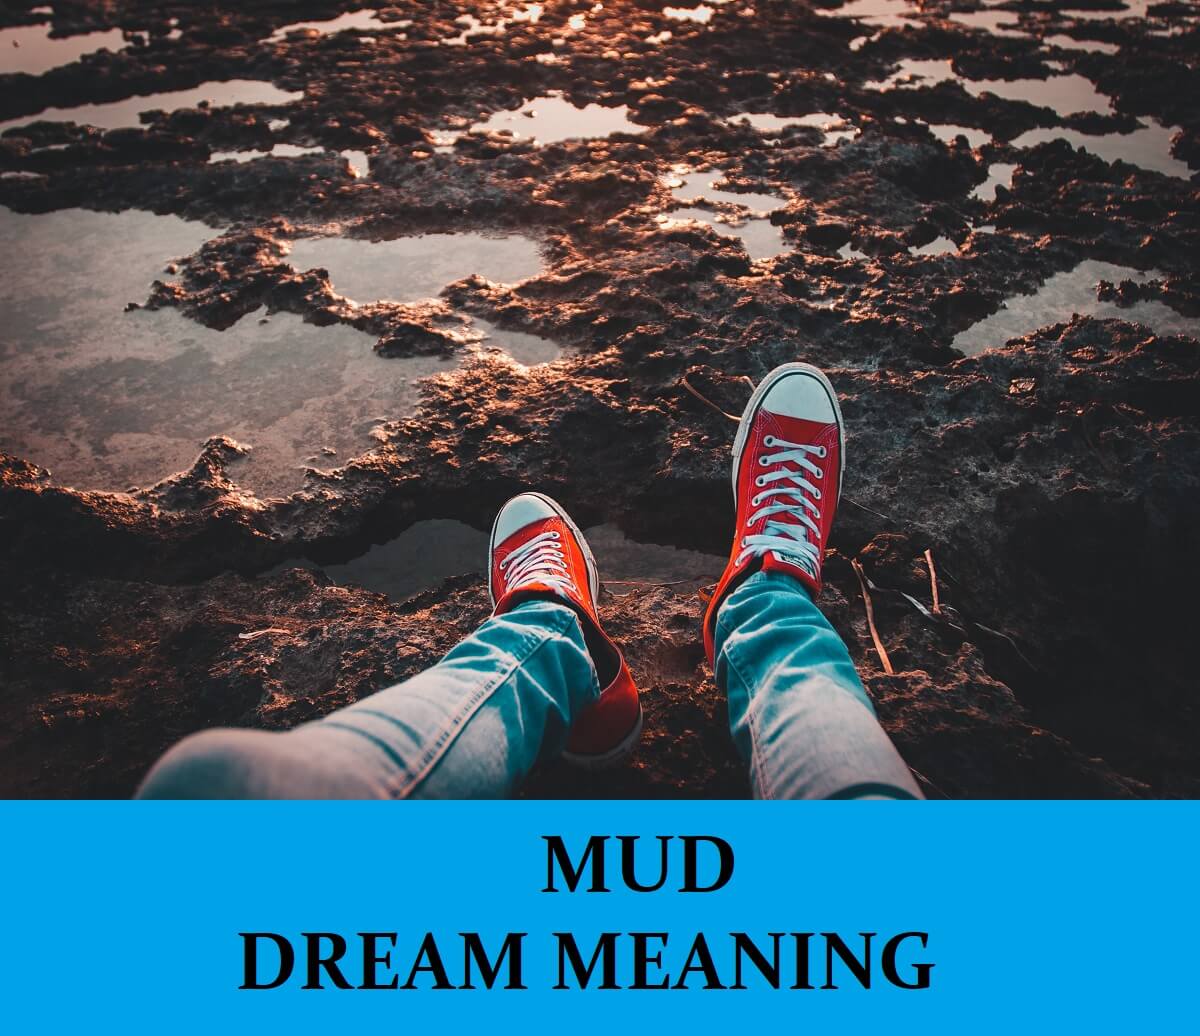 Dream About Mud